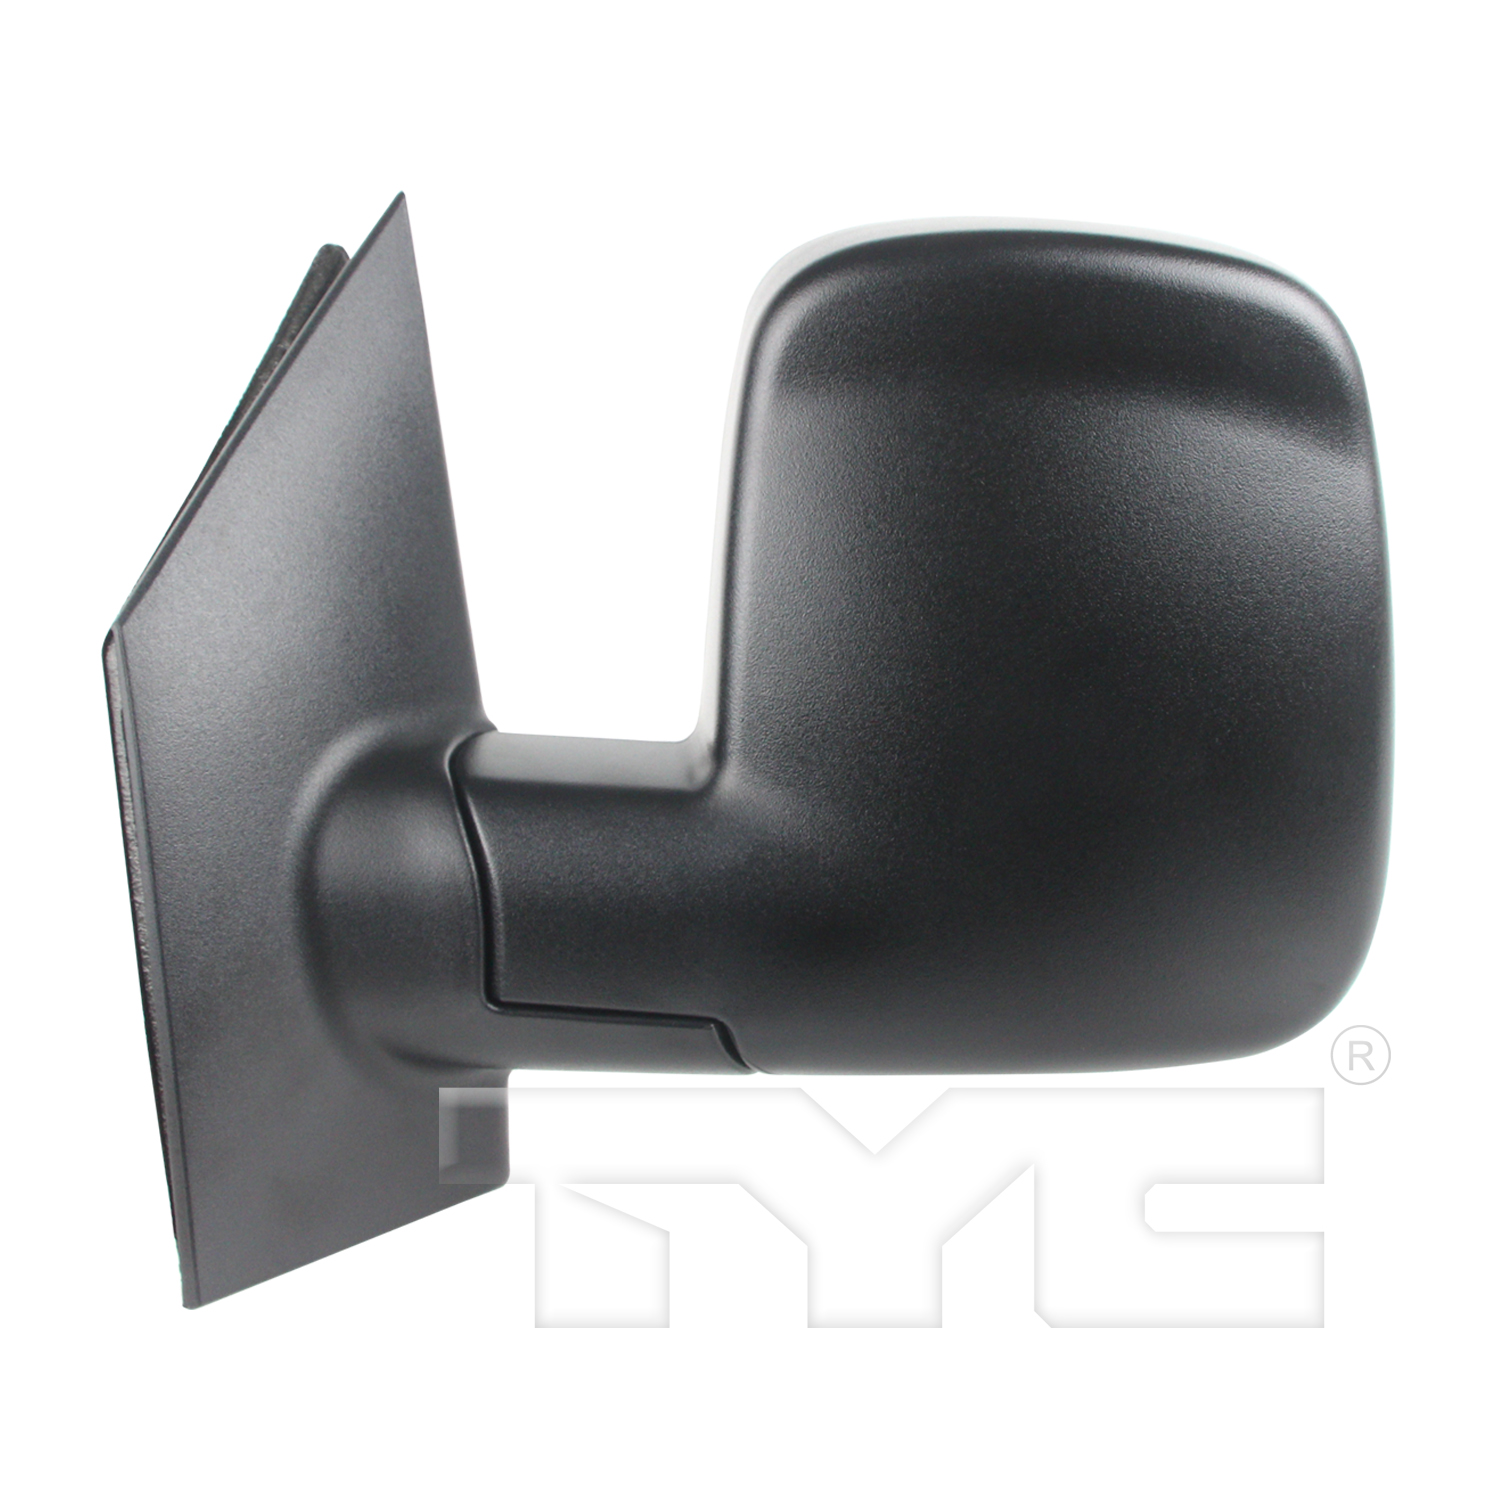 Aftermarket MIRRORS for CHEVROLET - EXPRESS 2500, EXPRESS 2500,08-23,LT Mirror outside rear view